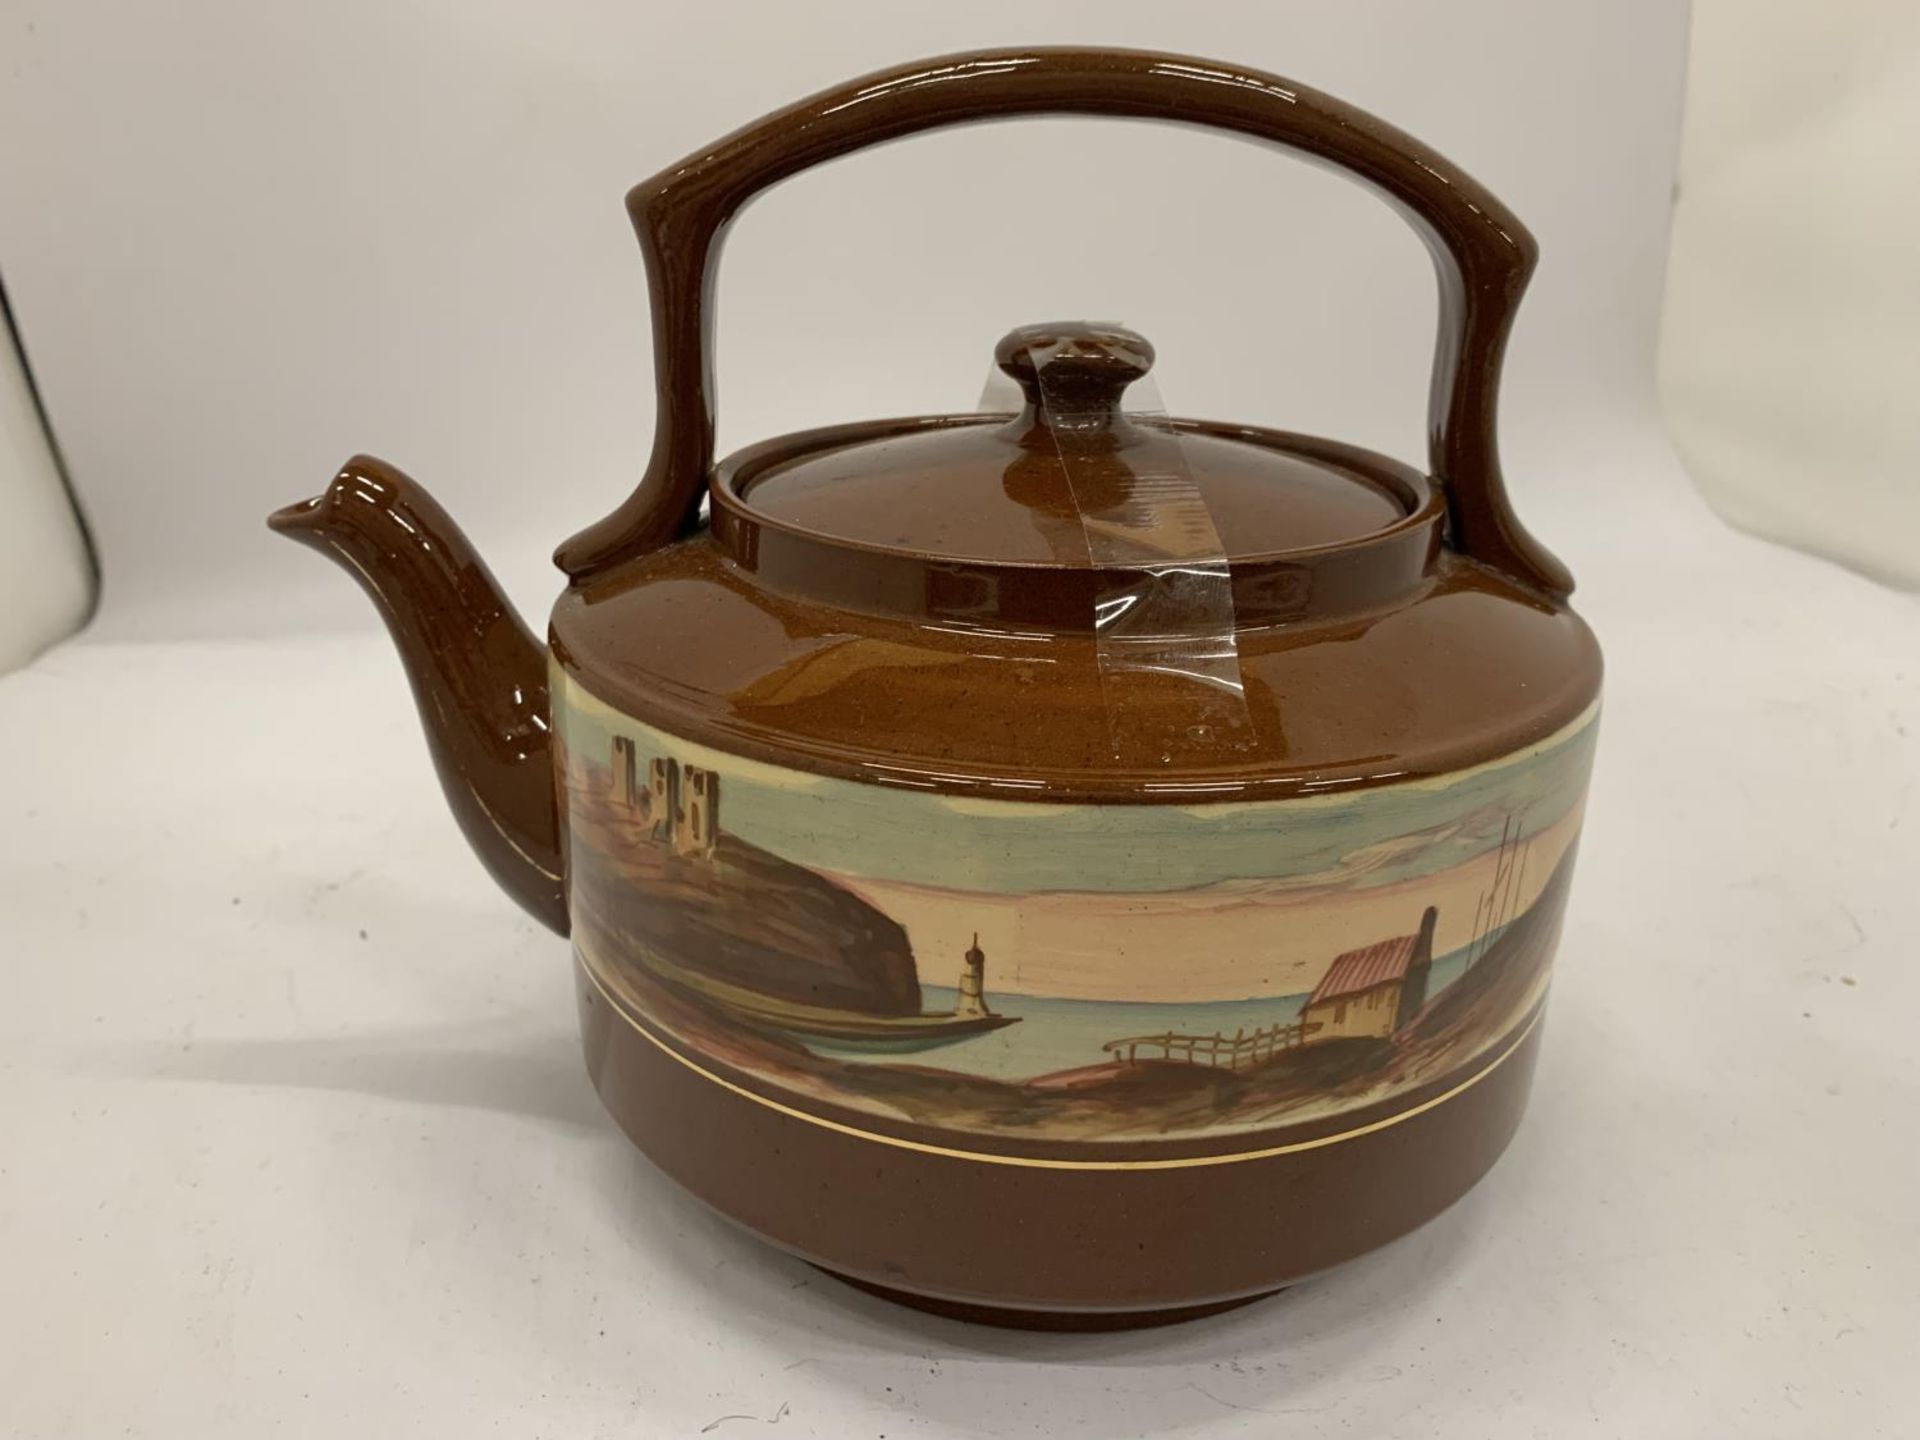 A VINTAGE ROYAL DOULTON STYLE TEAPOT WITH TRANSFER PRINTED FREIZE - Image 2 of 8